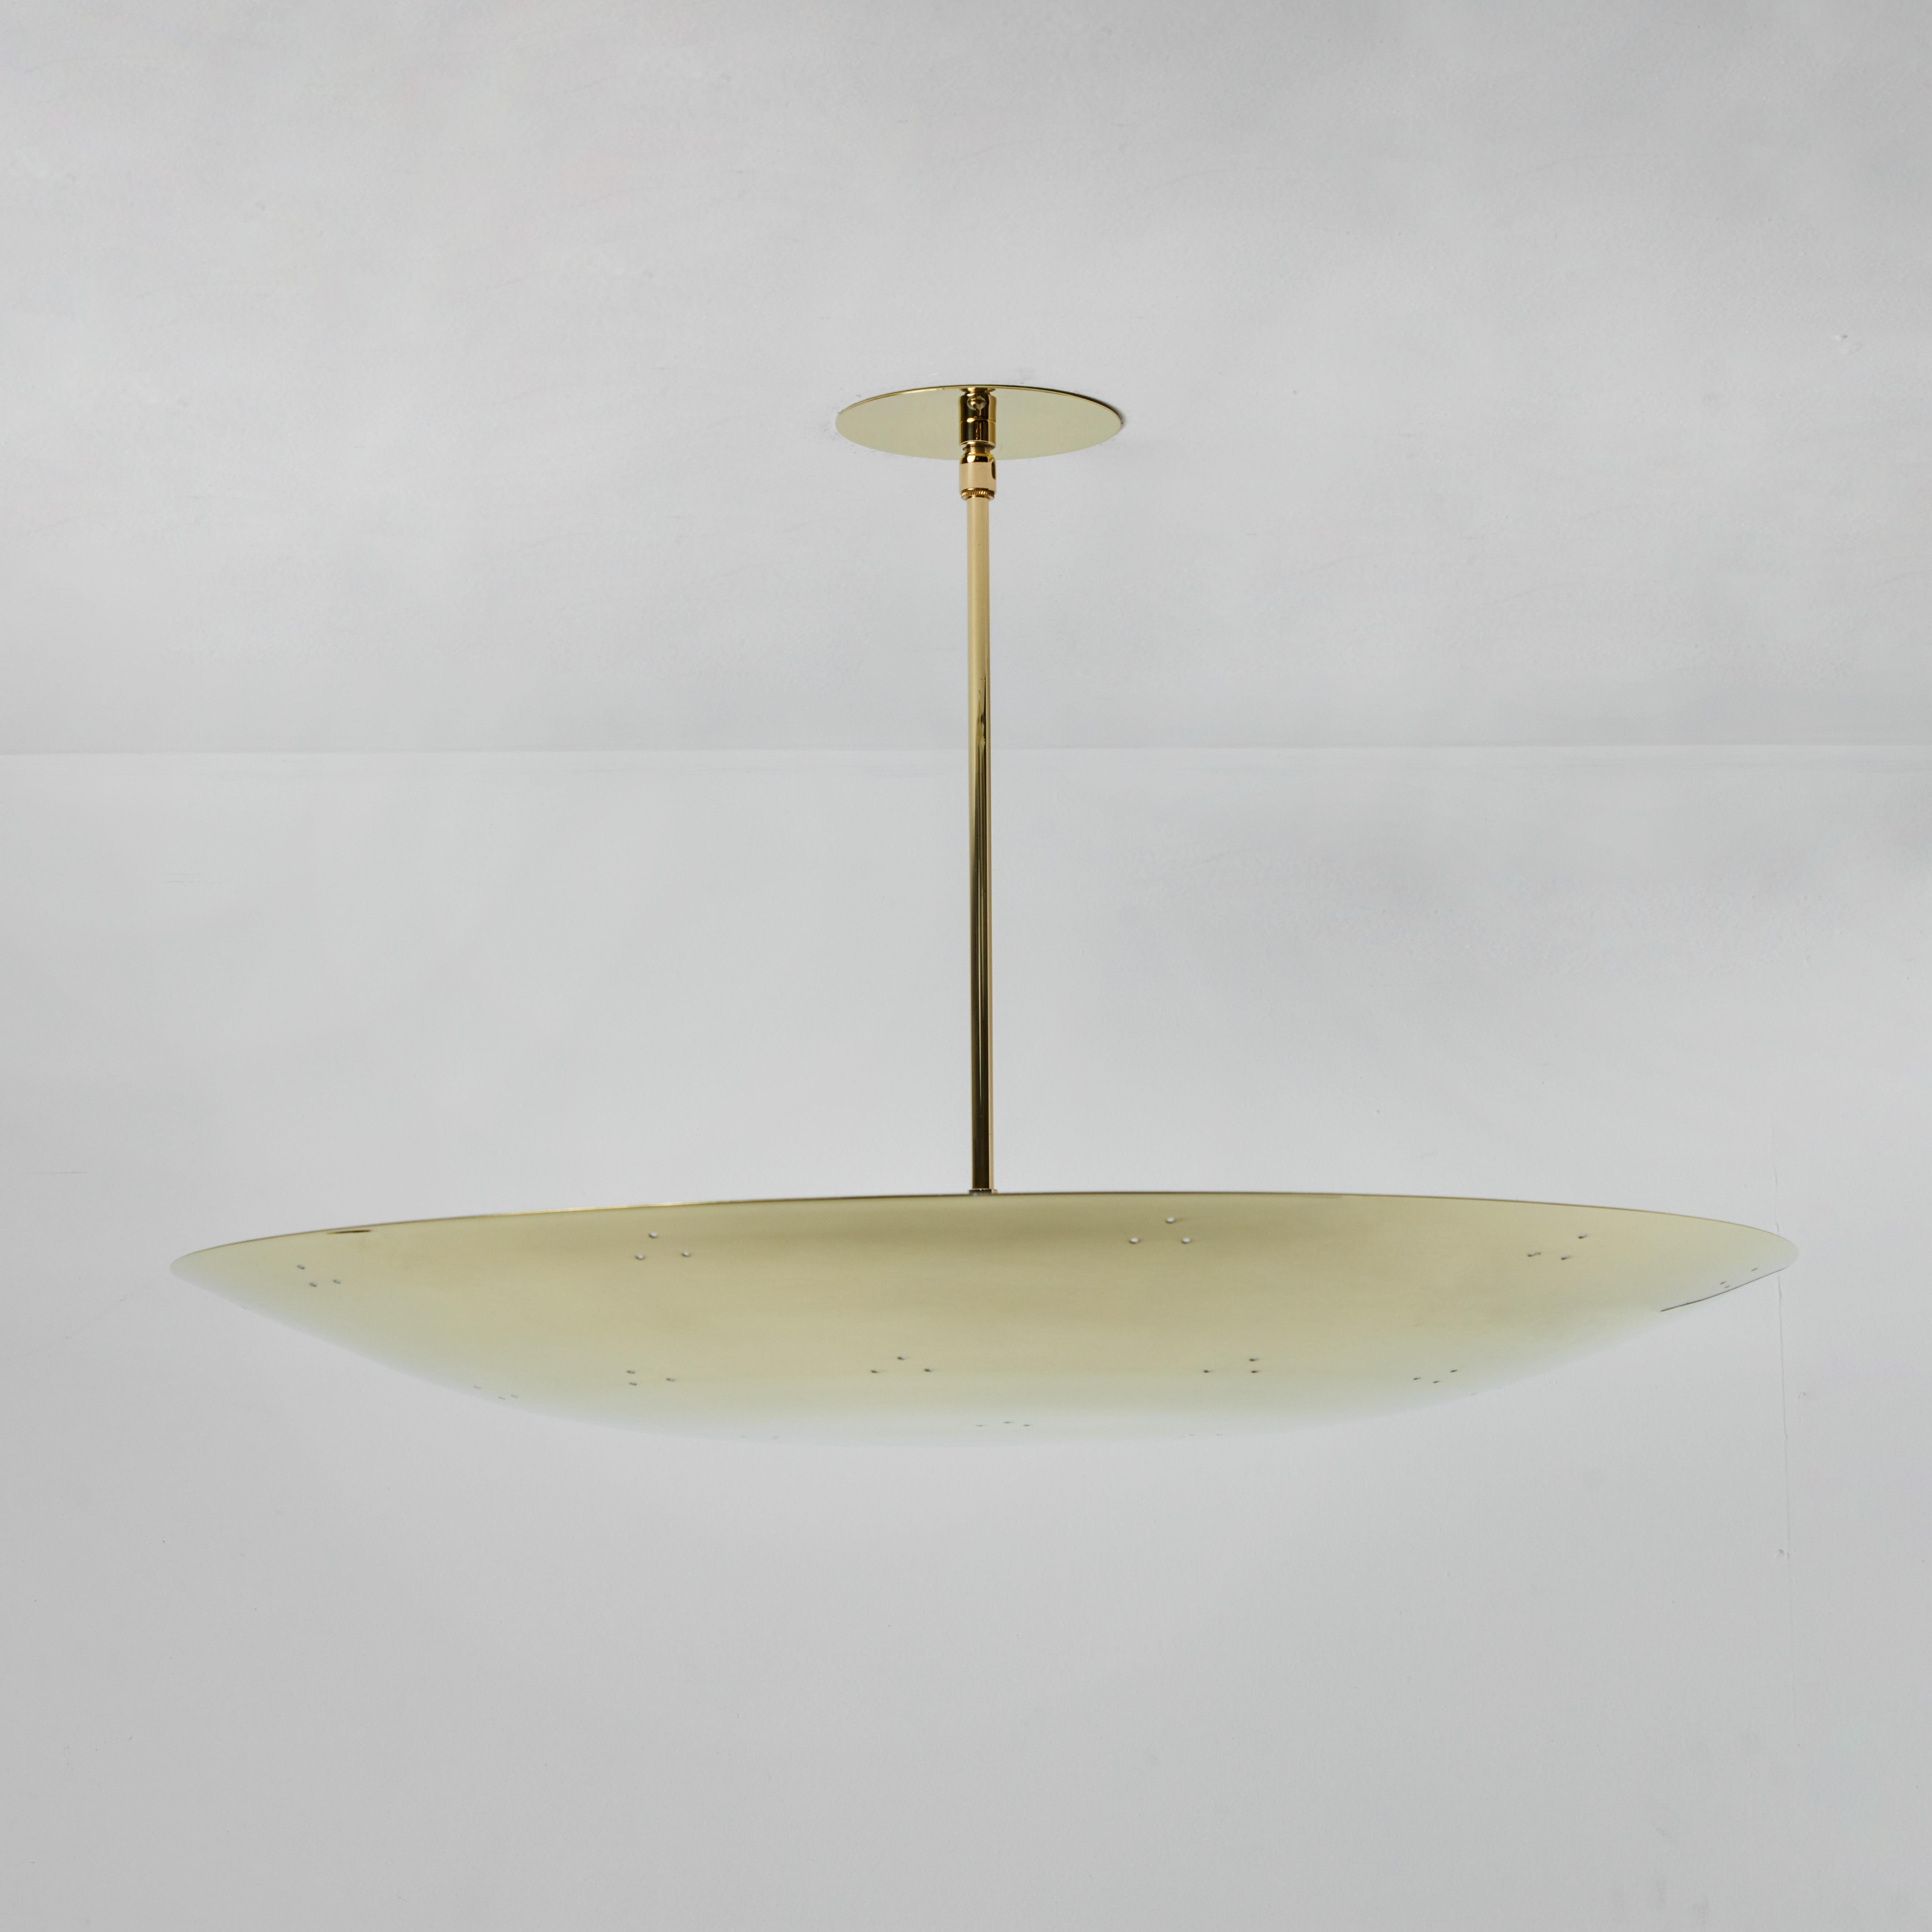 Large two enlighten 'rey' perforated polished brass dome chandelier. Hand-fabricated in Los Angeles, these highly refined ceiling lamps are reminiscent of the iconic midcentury Finnish designs of Paavo Tynell and Lisa Johansson Pape. Executed in